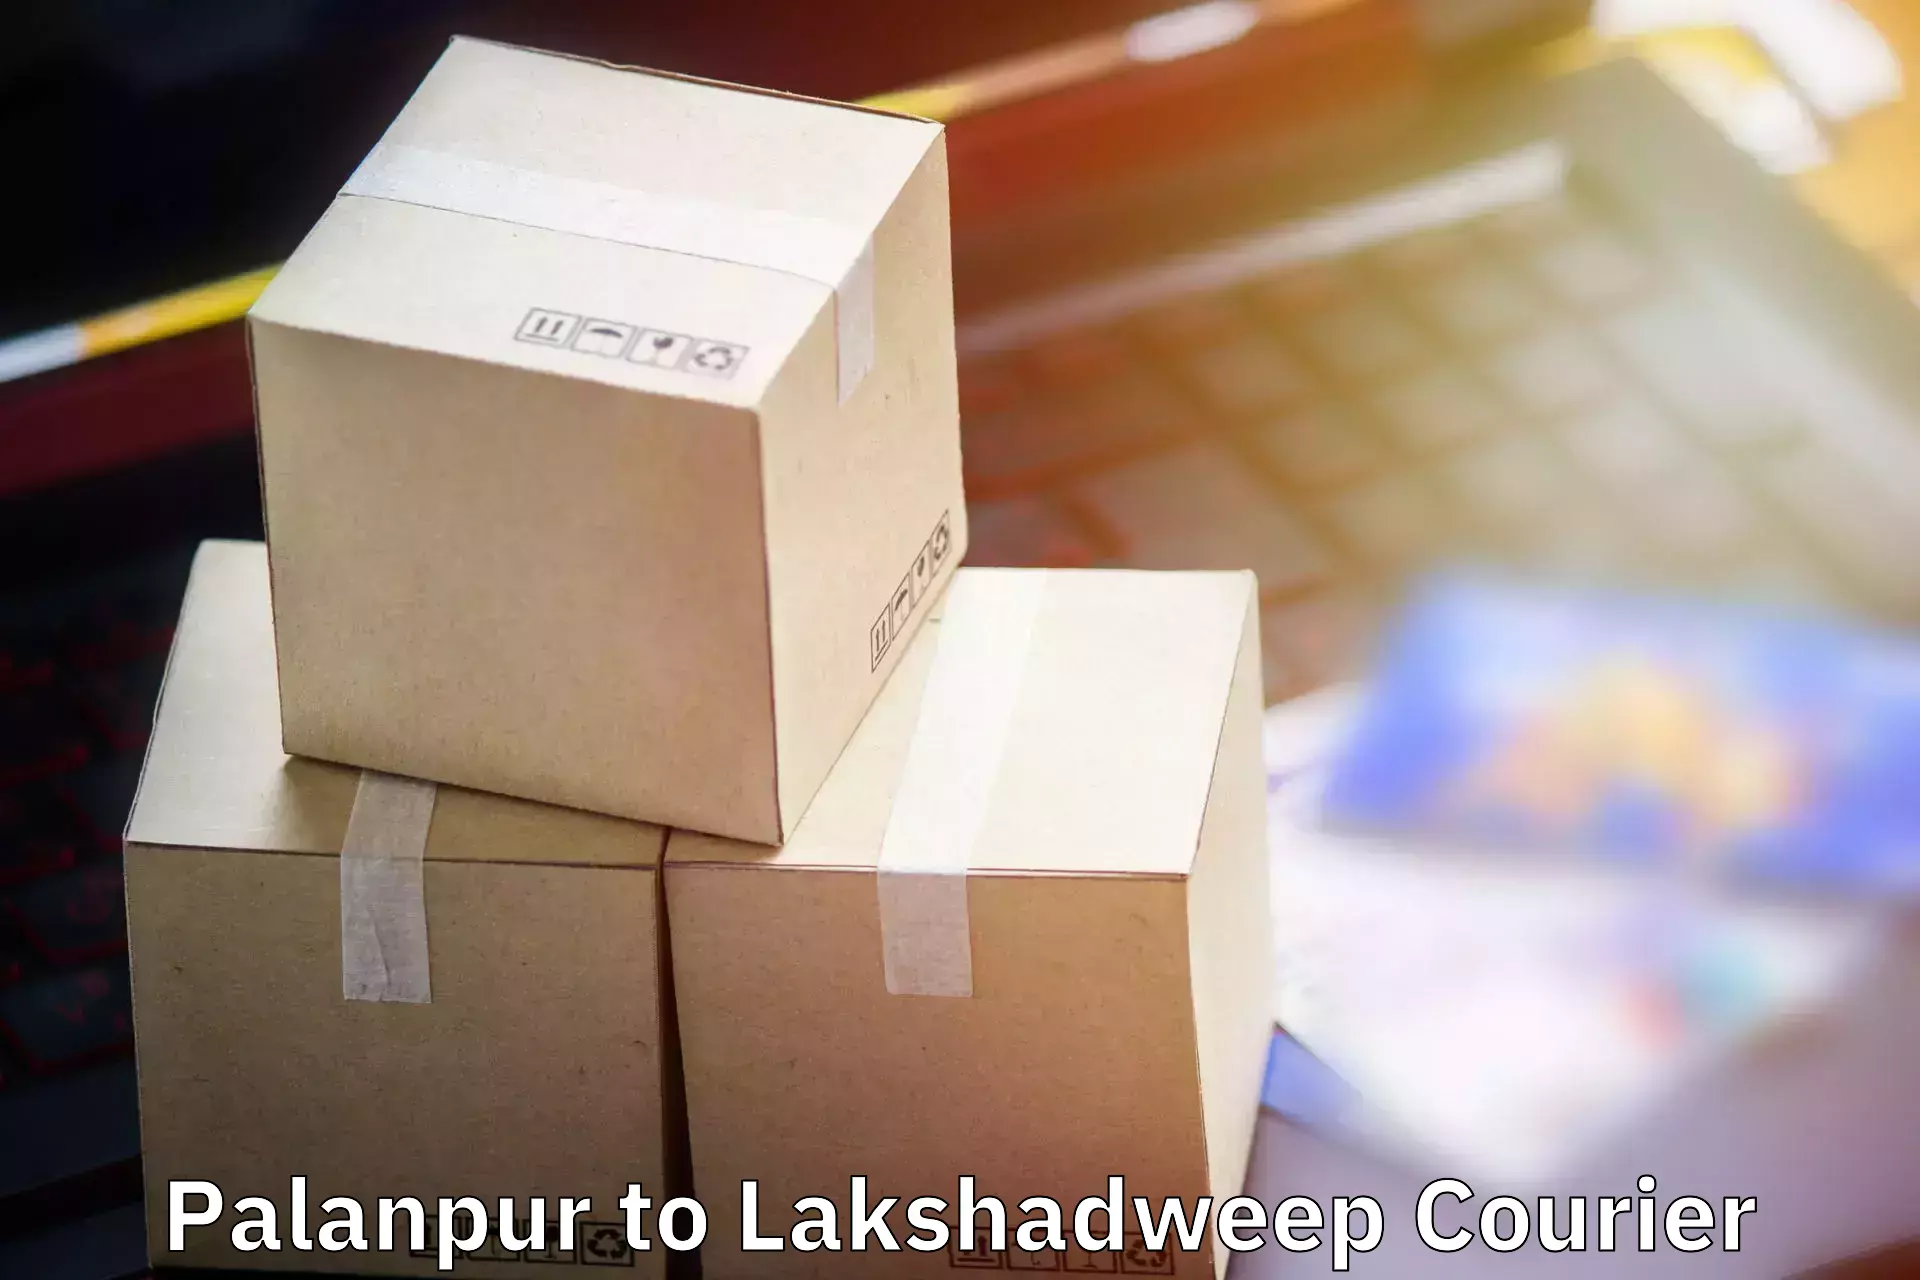 Luggage transport consultancy Palanpur to Lakshadweep